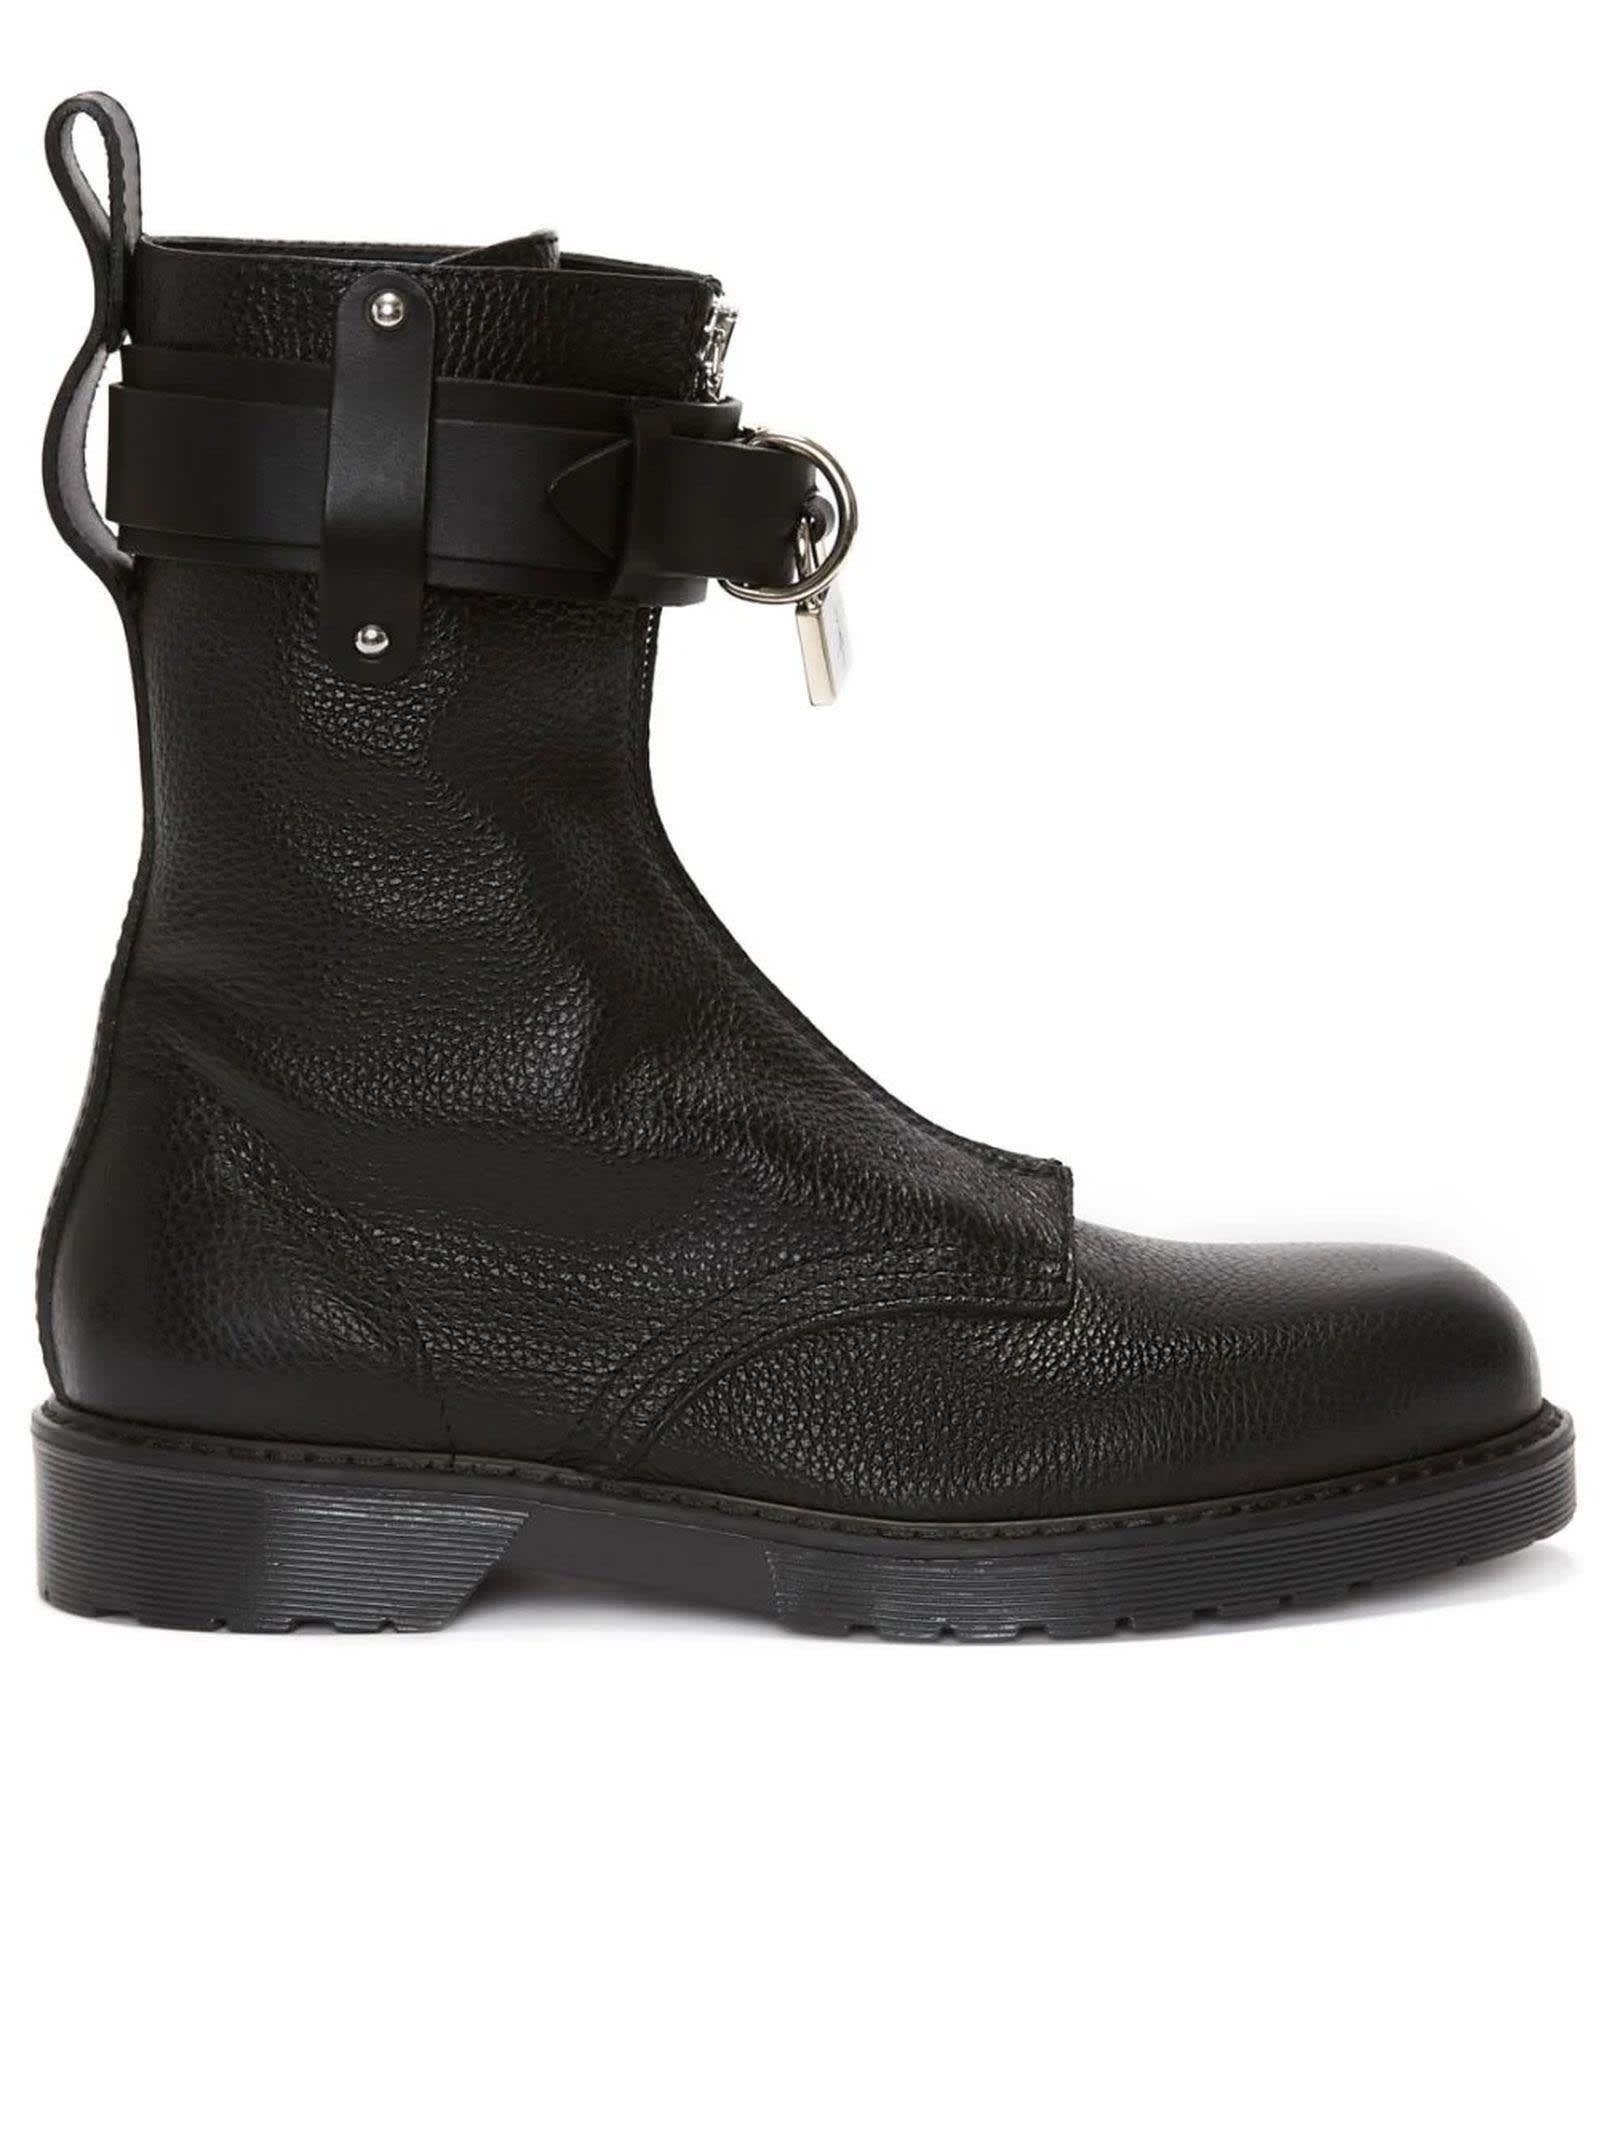 J.W. Anderson Jw Anderson Boots Black